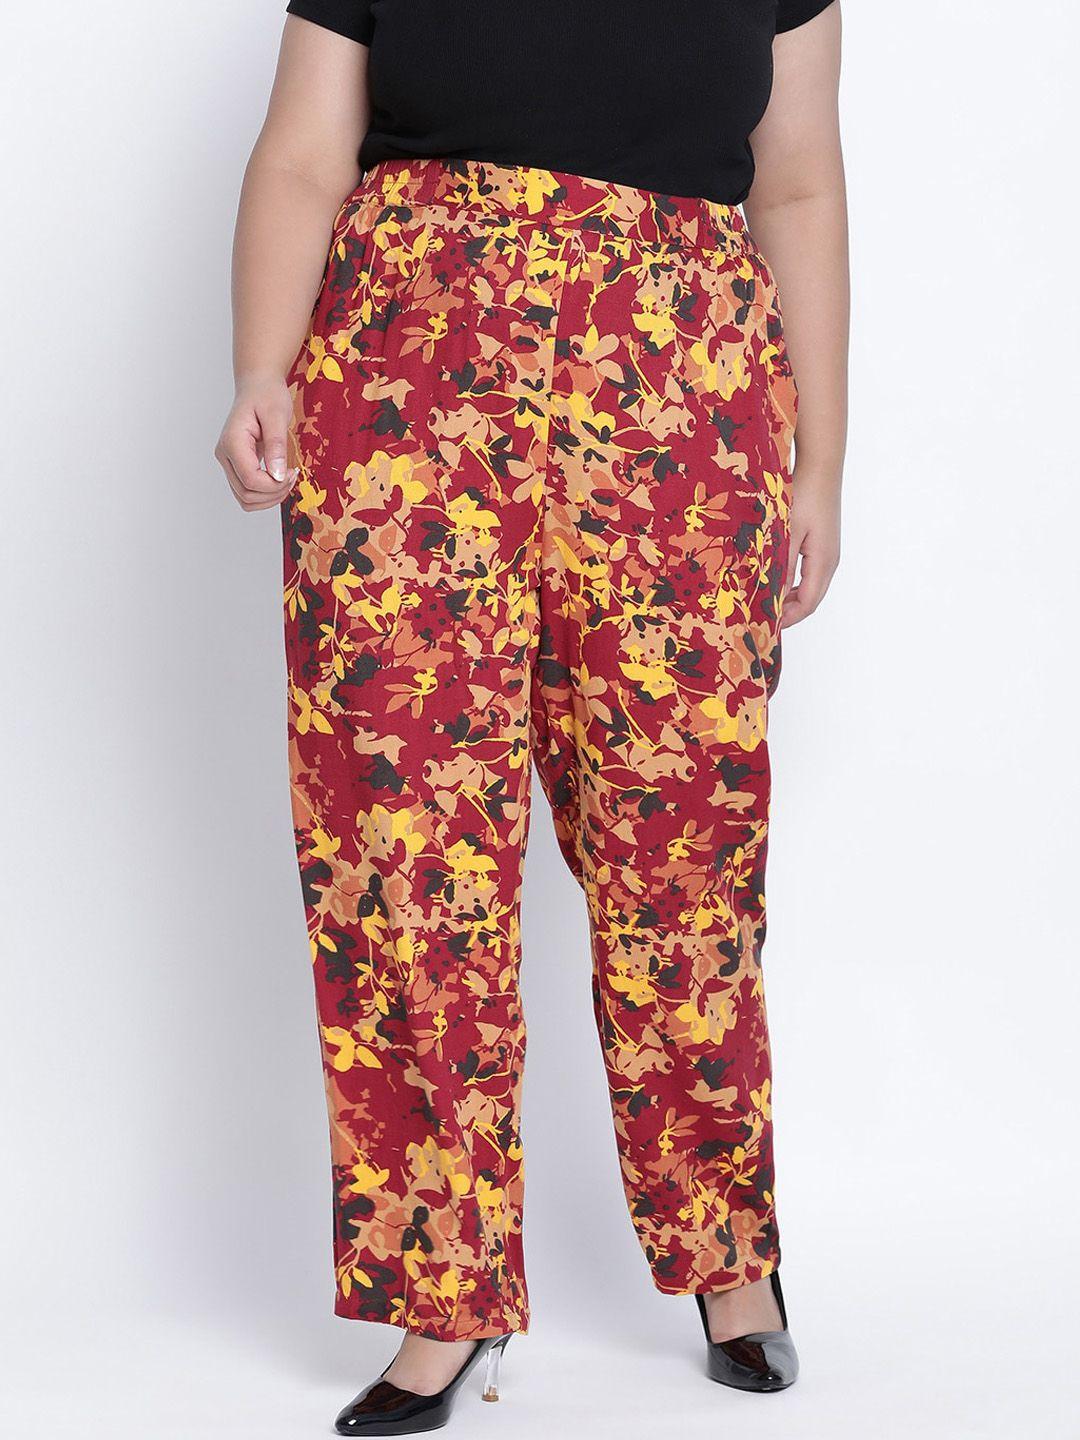 oxolloxo women maroon floral printed parallel trousers